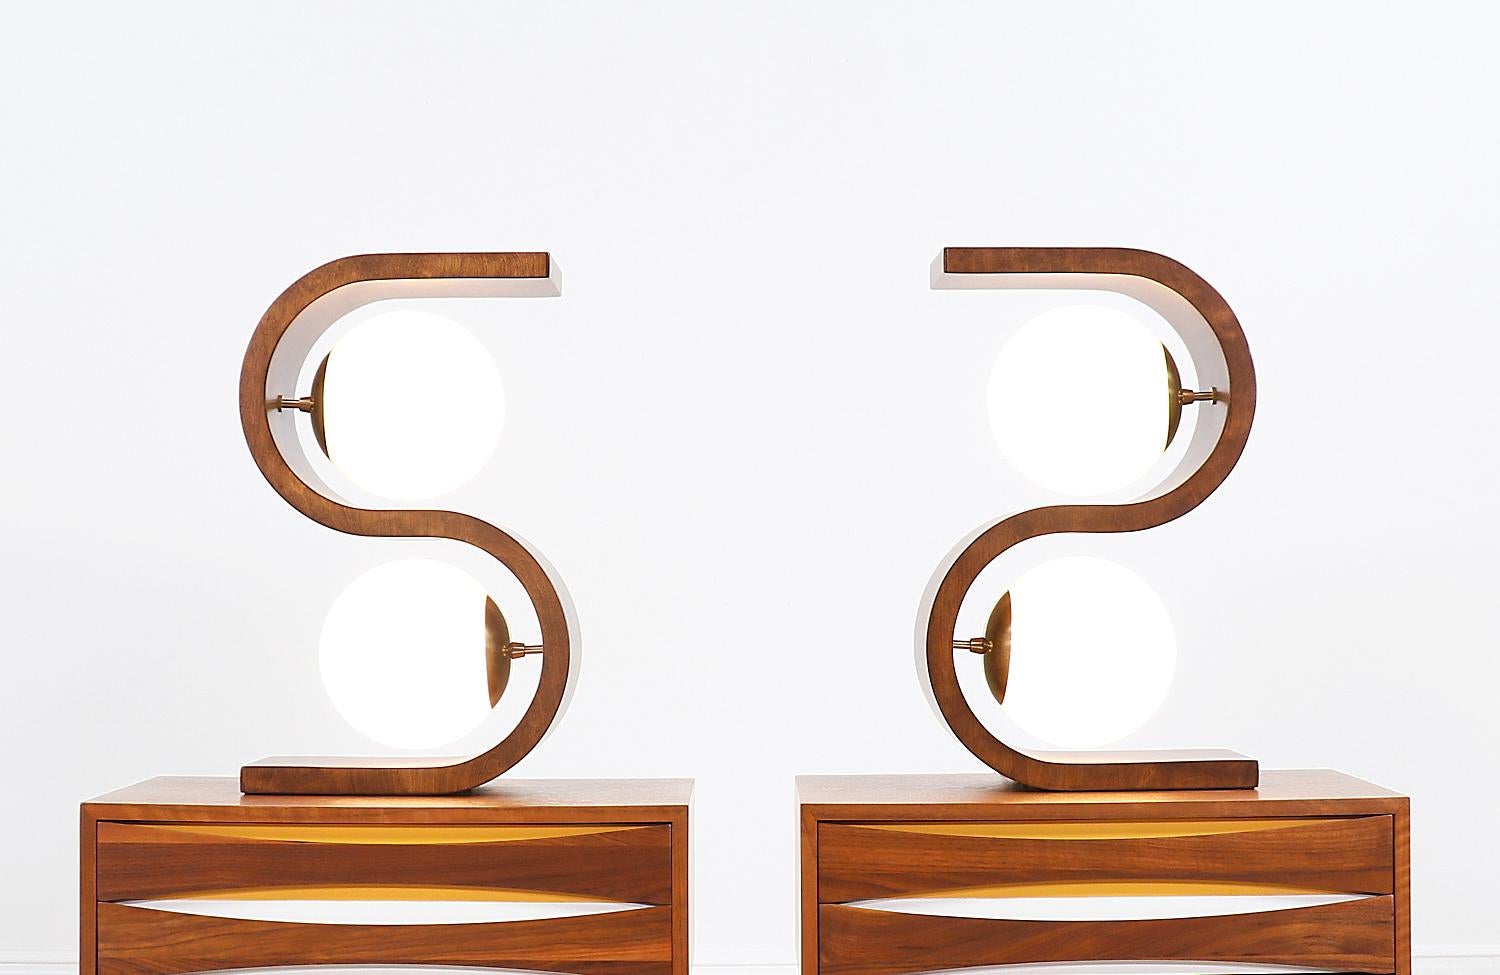 Rare pair of Calfornia Modernist table lamps designed by architect and designer Jack Haywood for Modeline of California in the United States circa 1970s. Our dazzling 